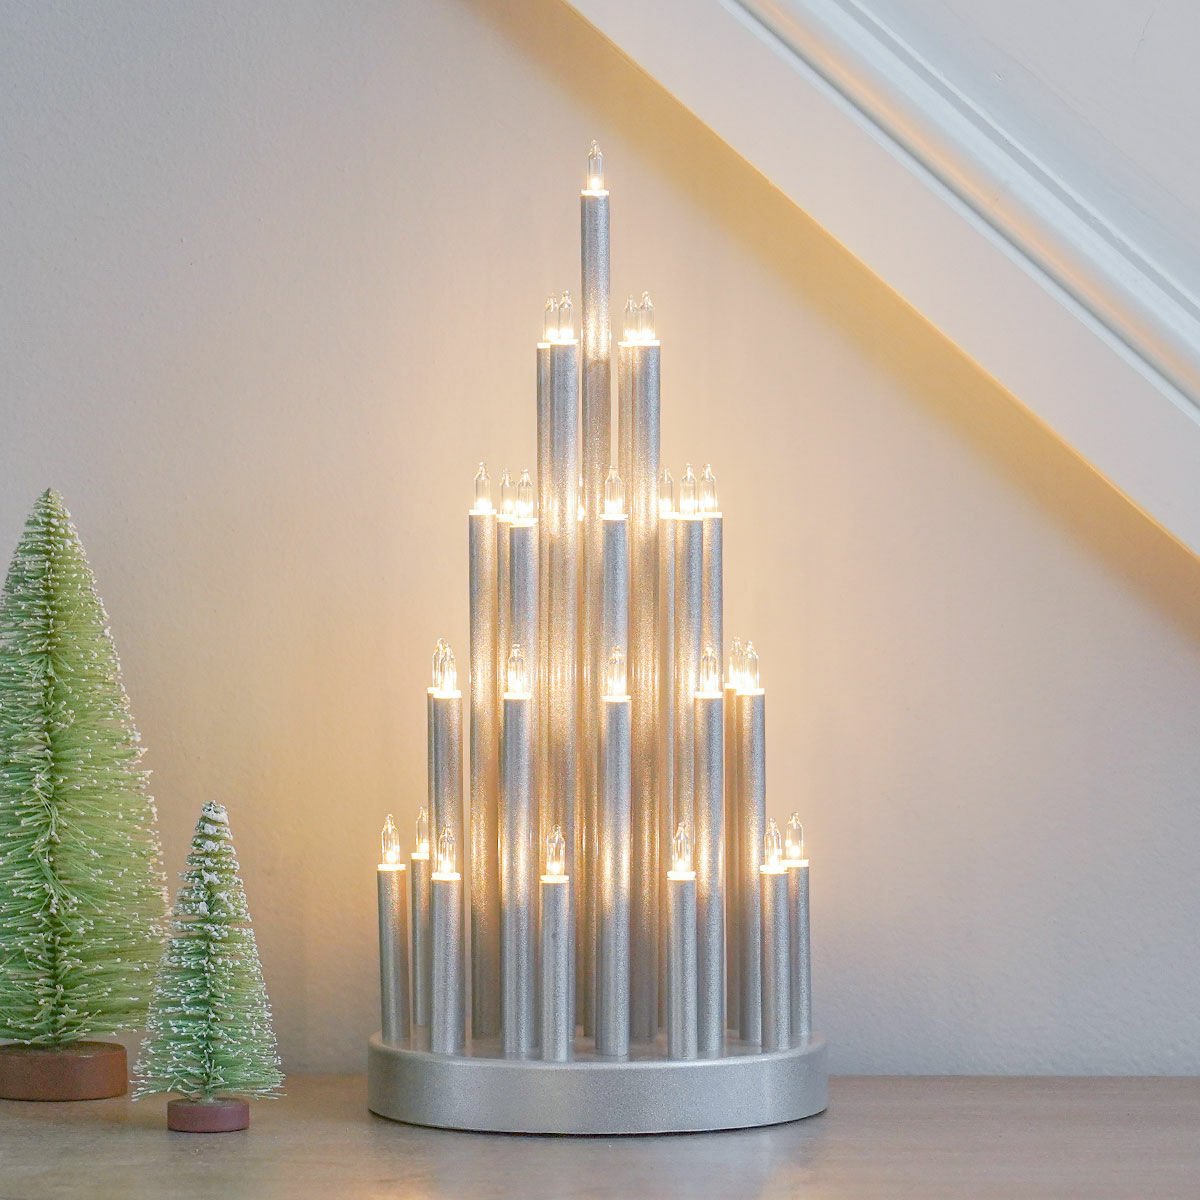 33cm Silver Tiered Effect Candle Bridge, 33 Warm White LEDs image 1